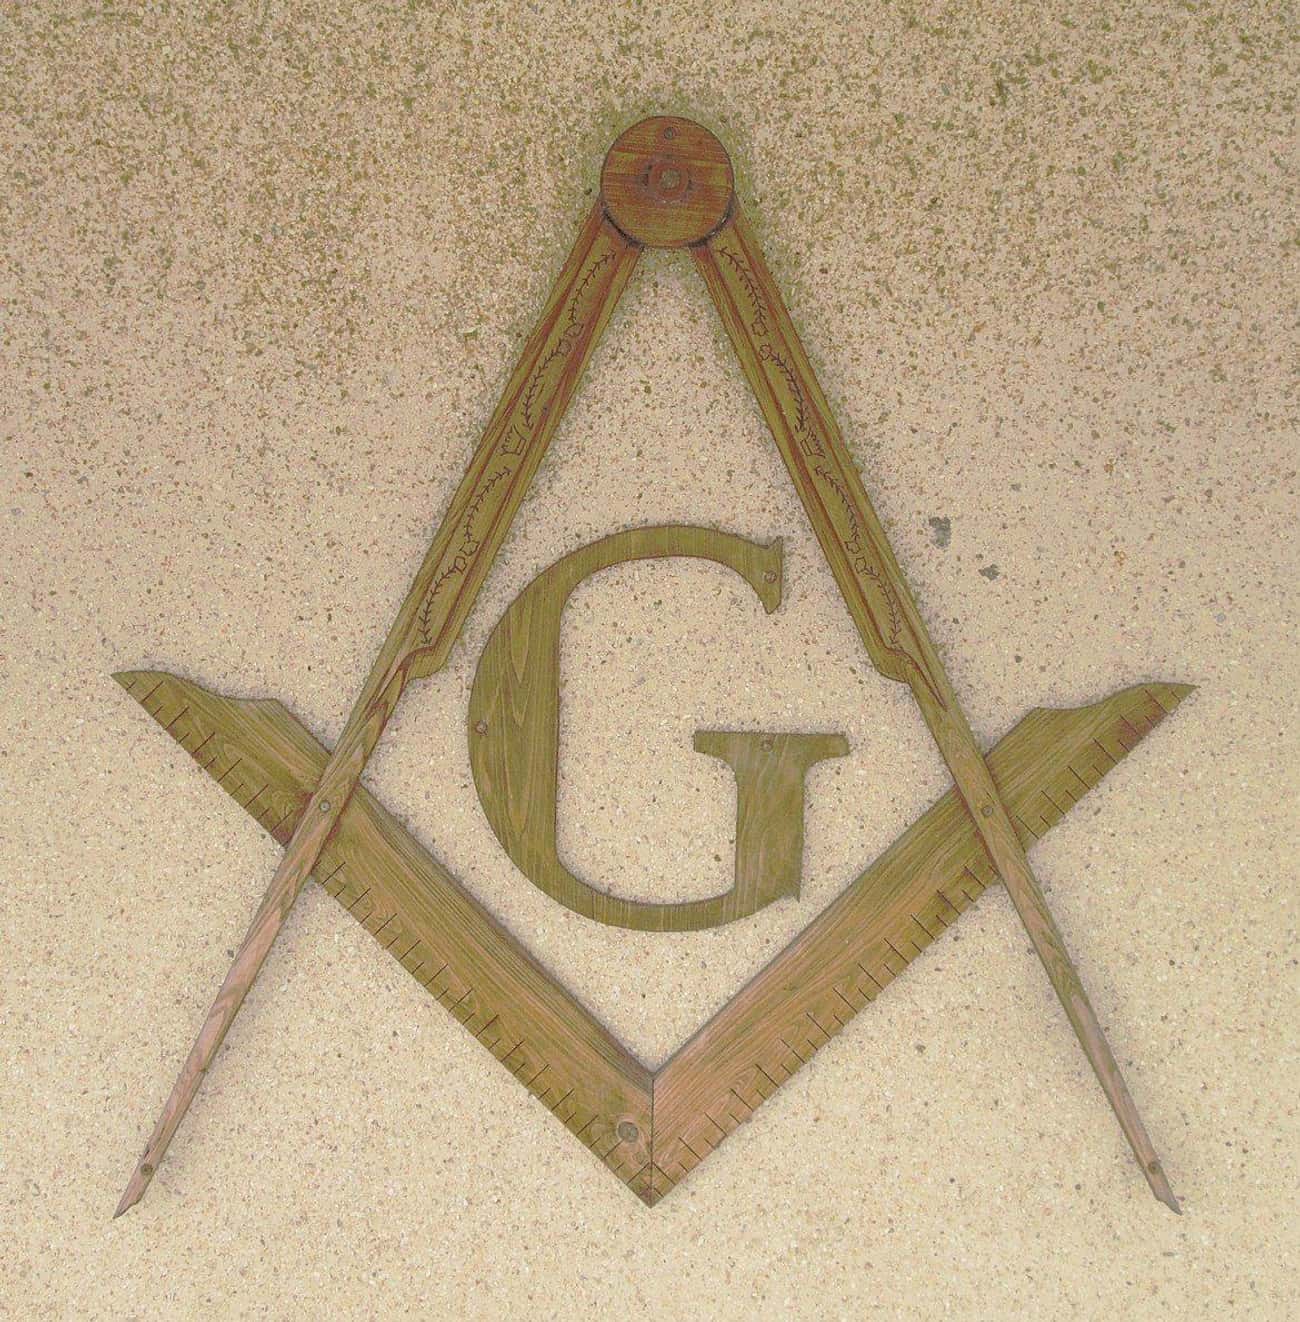 The Freemasons And The Illuminati Are Distant Cousins At Best